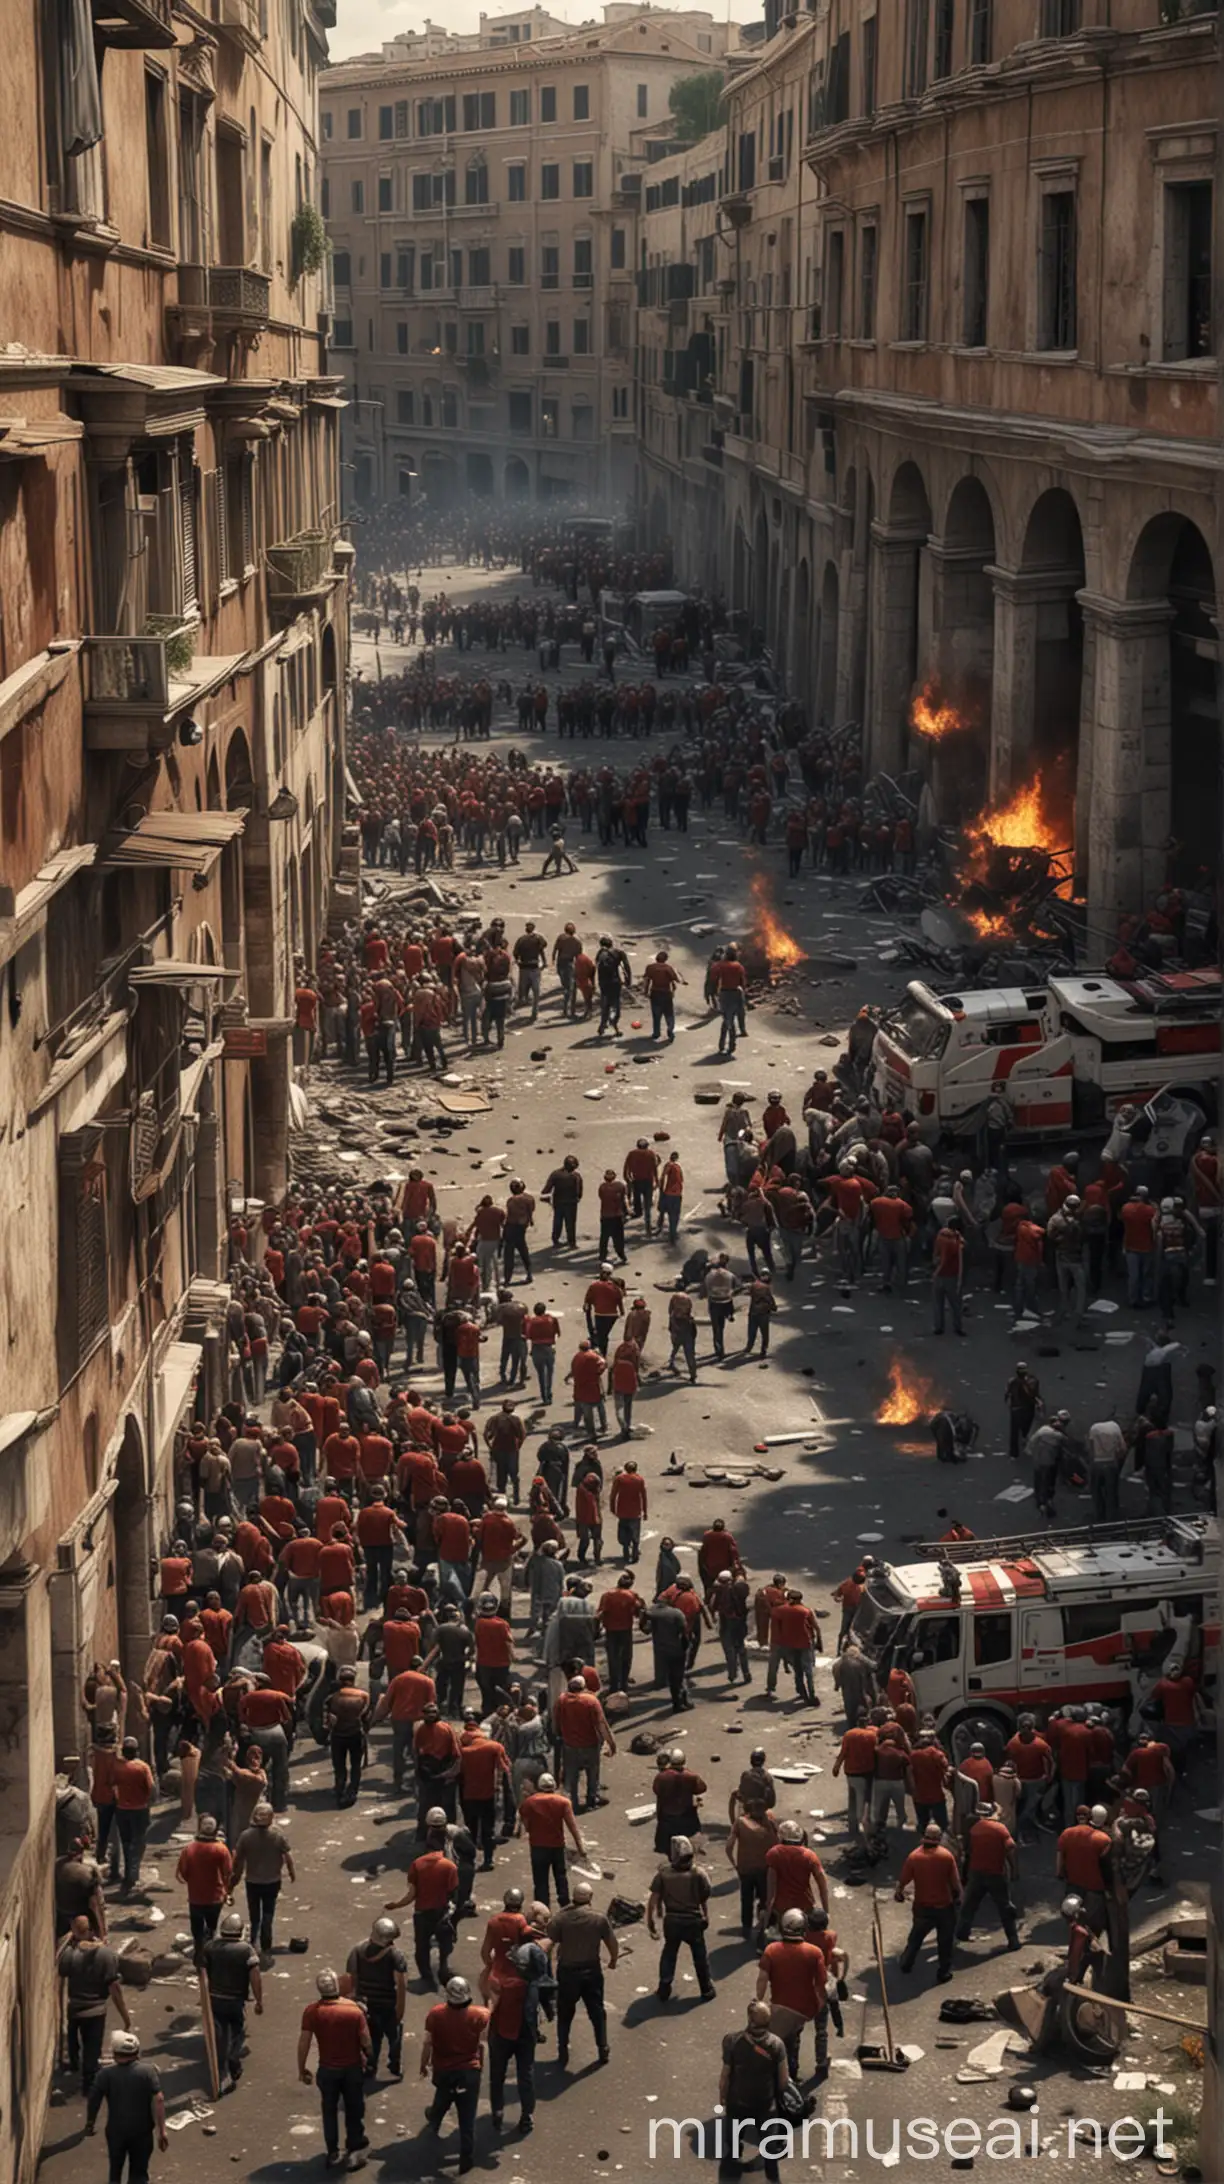 Scene of riots and unrest in Rome. hyper realistic